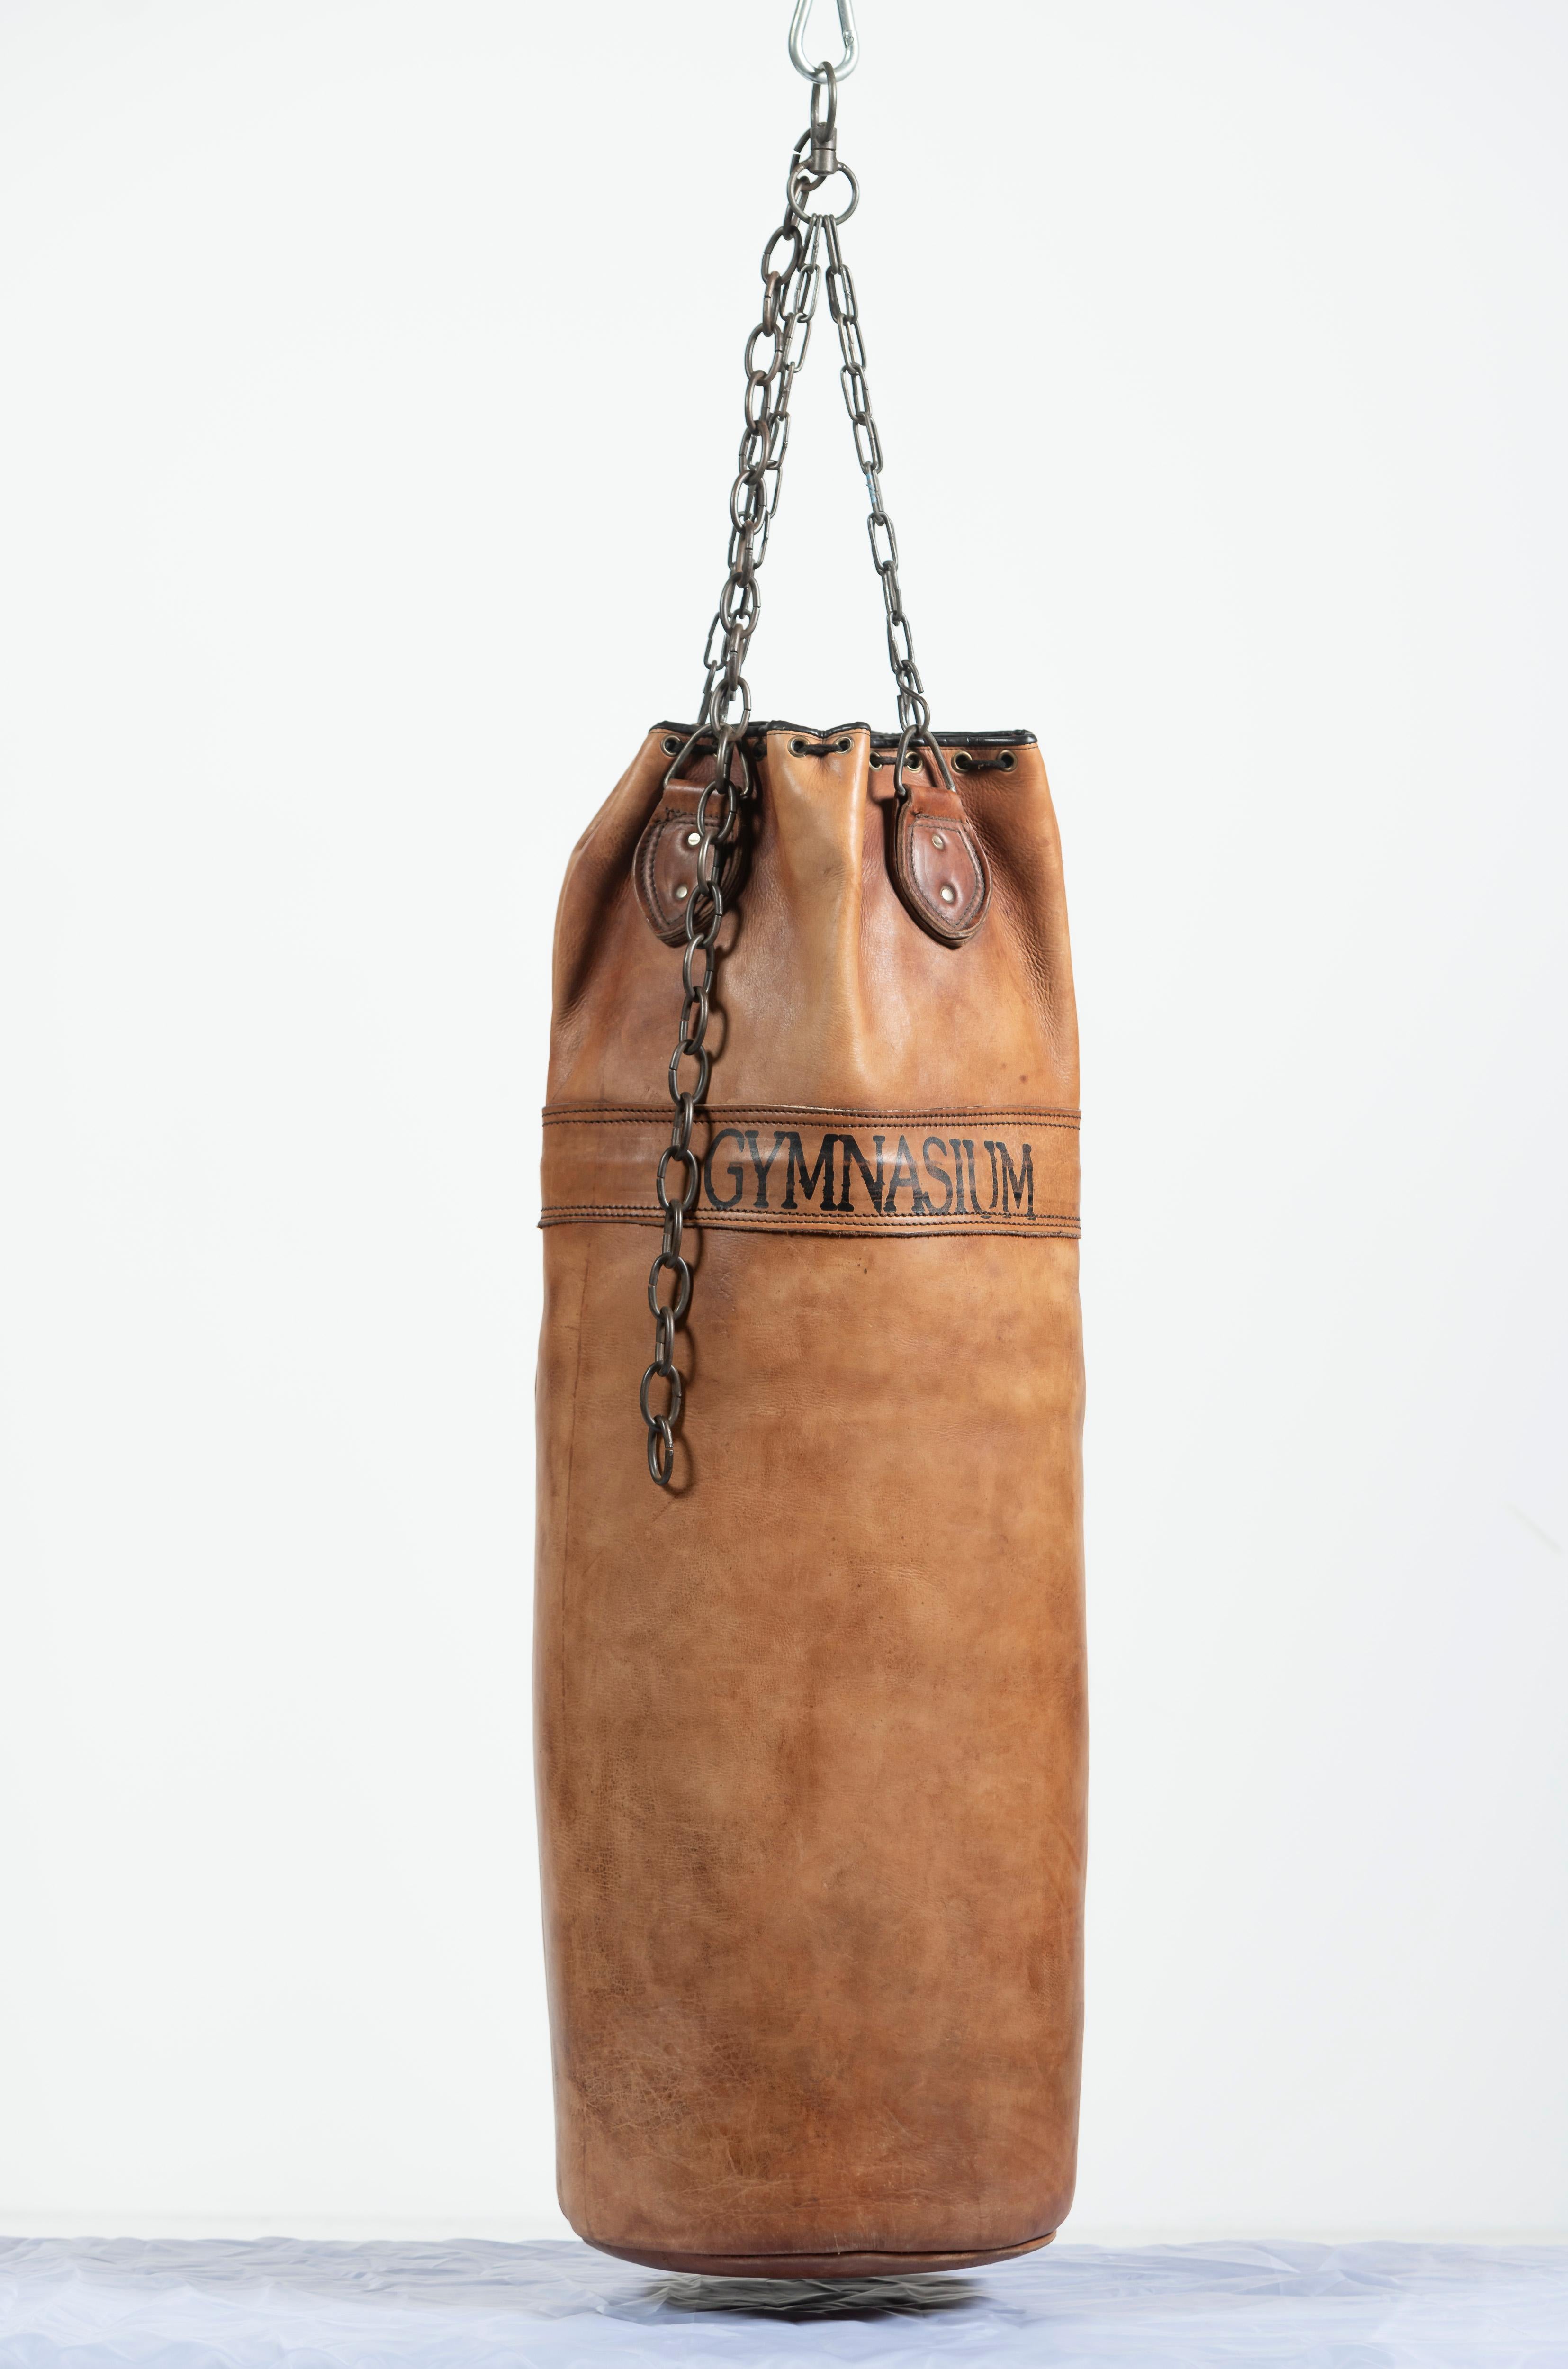 Time to upgrade your personal gym to include a stylish punching bag? This piece is made of vintage leather and has seen some action though is in great shape for all its wear and tear! Emblazoned with GYMNASIUM, the bag will make an immediate impact